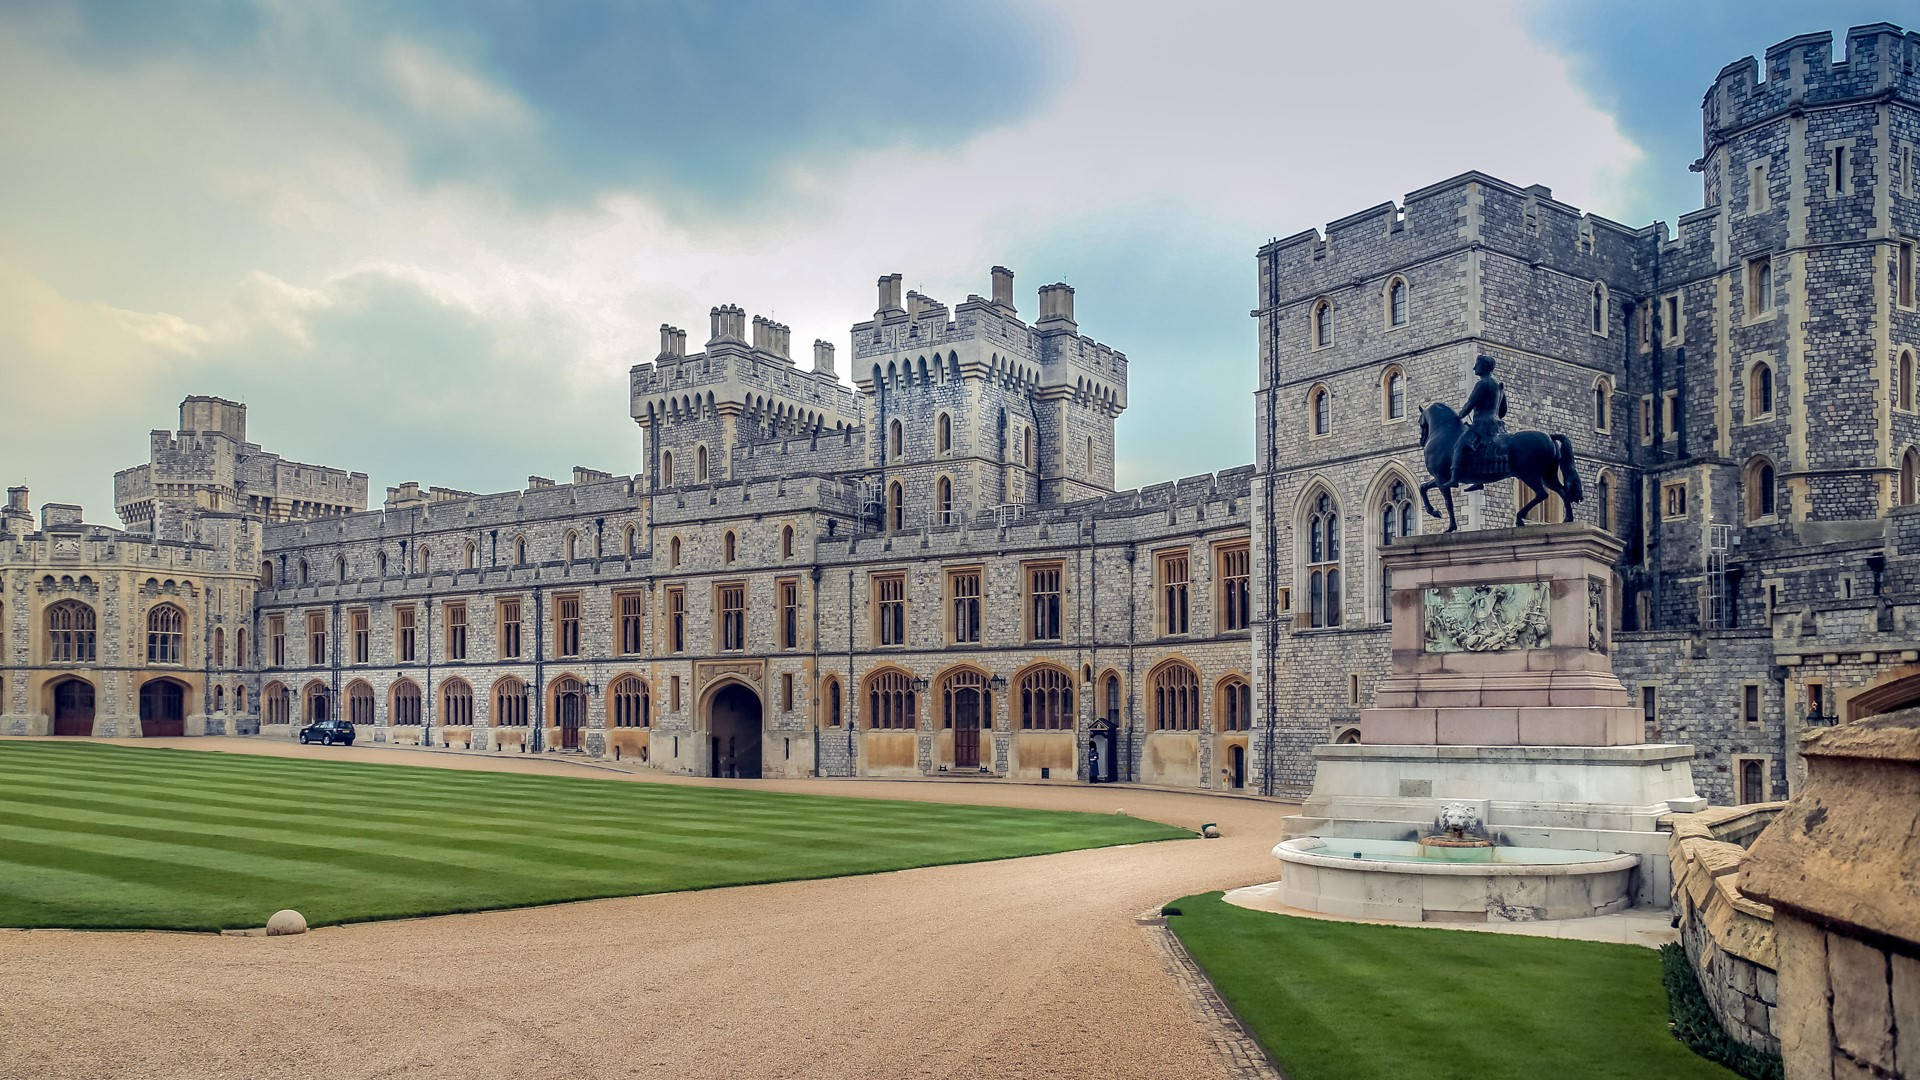 Windsor Castle Courtyard And Statue Wallpaper